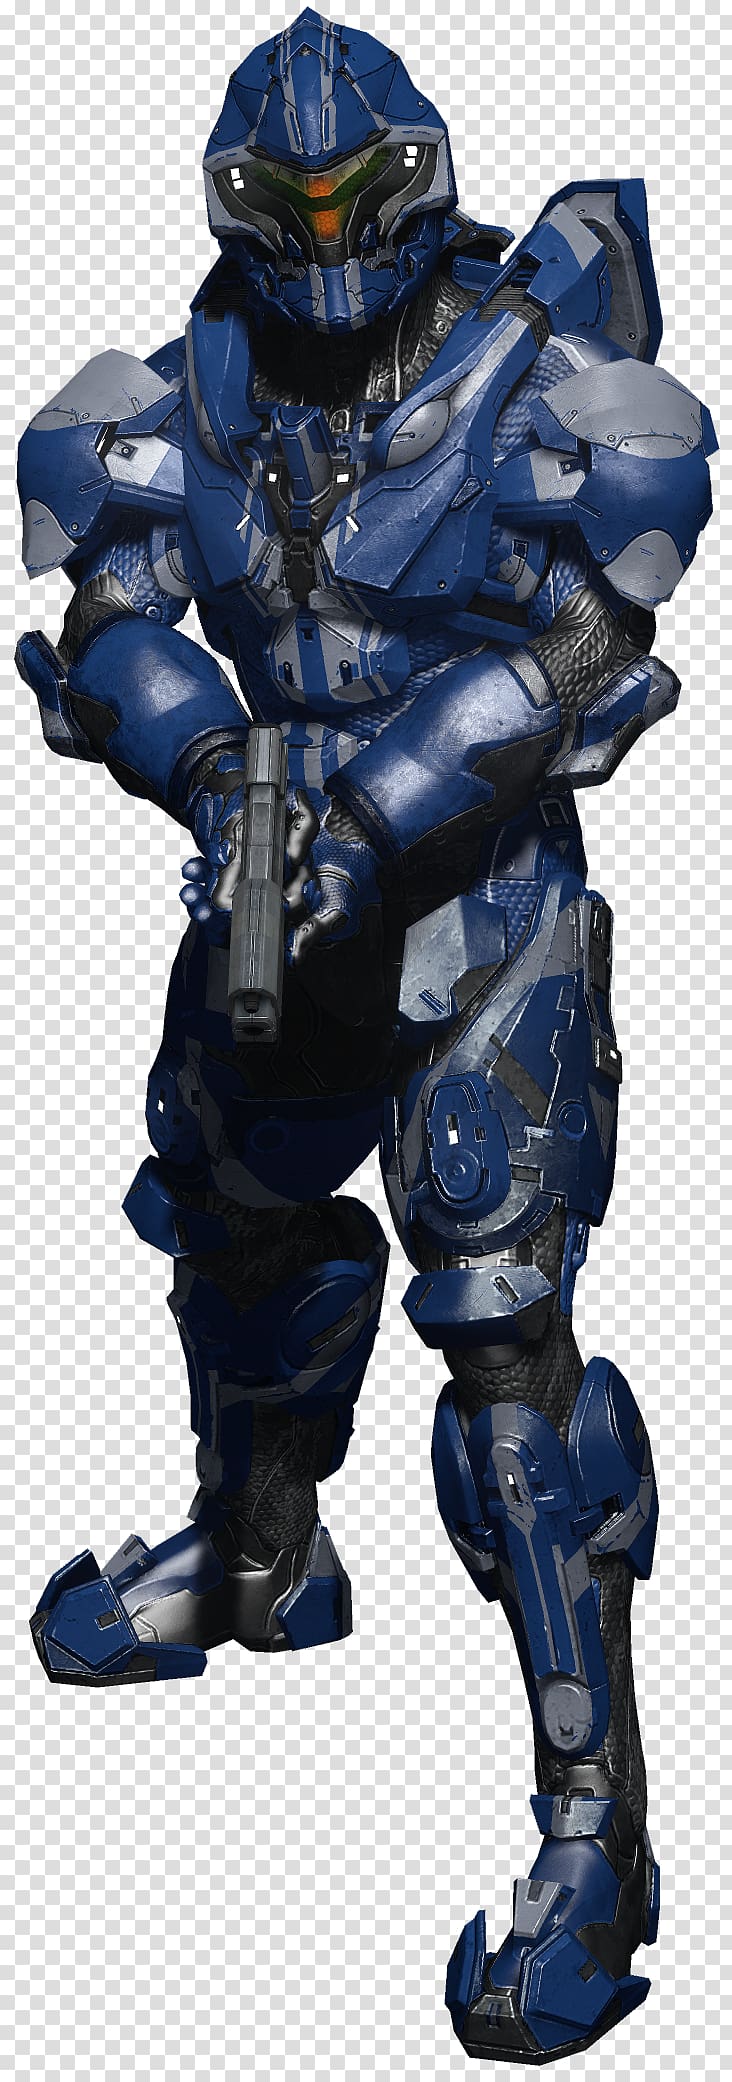 Halo 4 Halo 5: Guardians Pathfinder Roleplaying Game Master Chief Halo Wars 2, halo transparent background PNG clipart